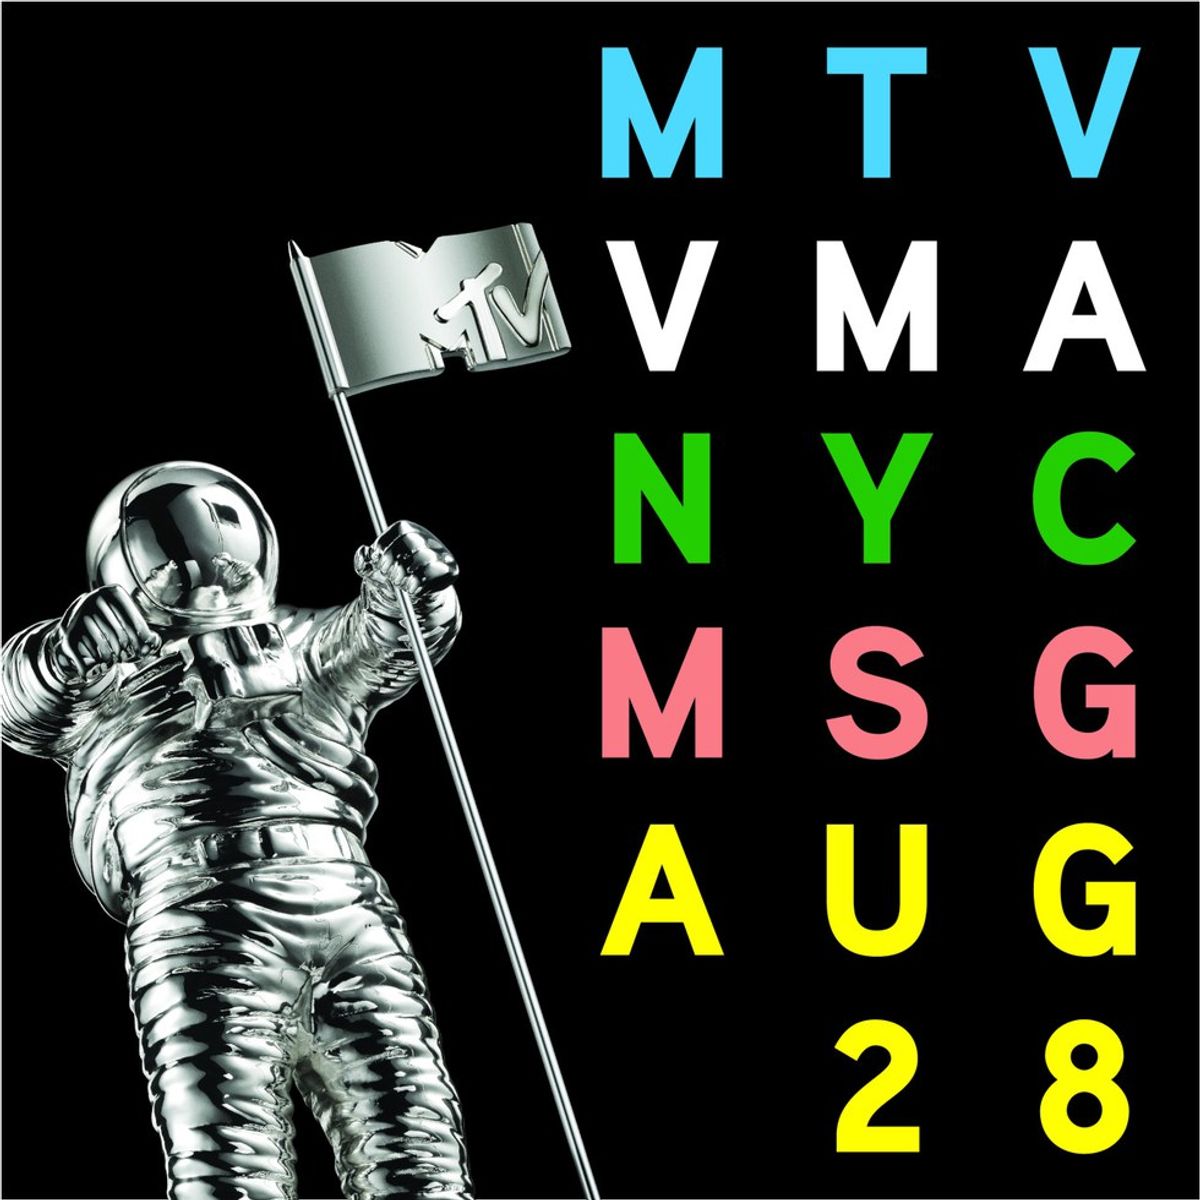 Top 5 Moments From 2016 VMAS